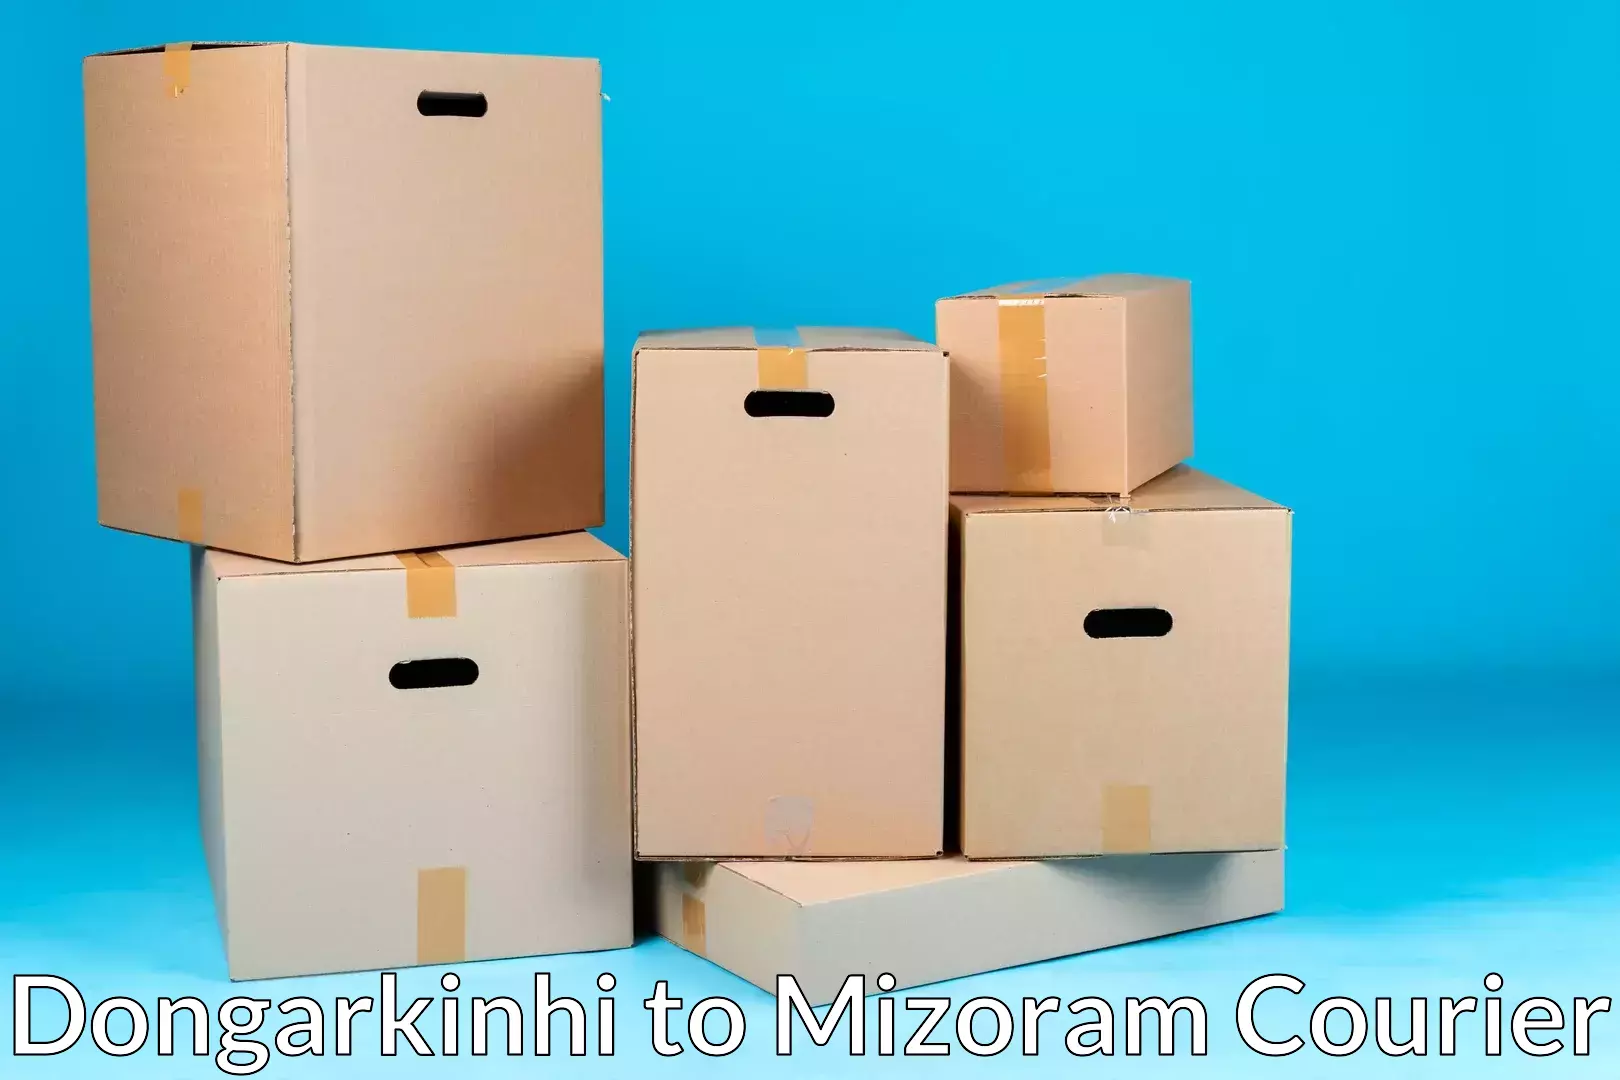 Quality relocation services Dongarkinhi to Mizoram